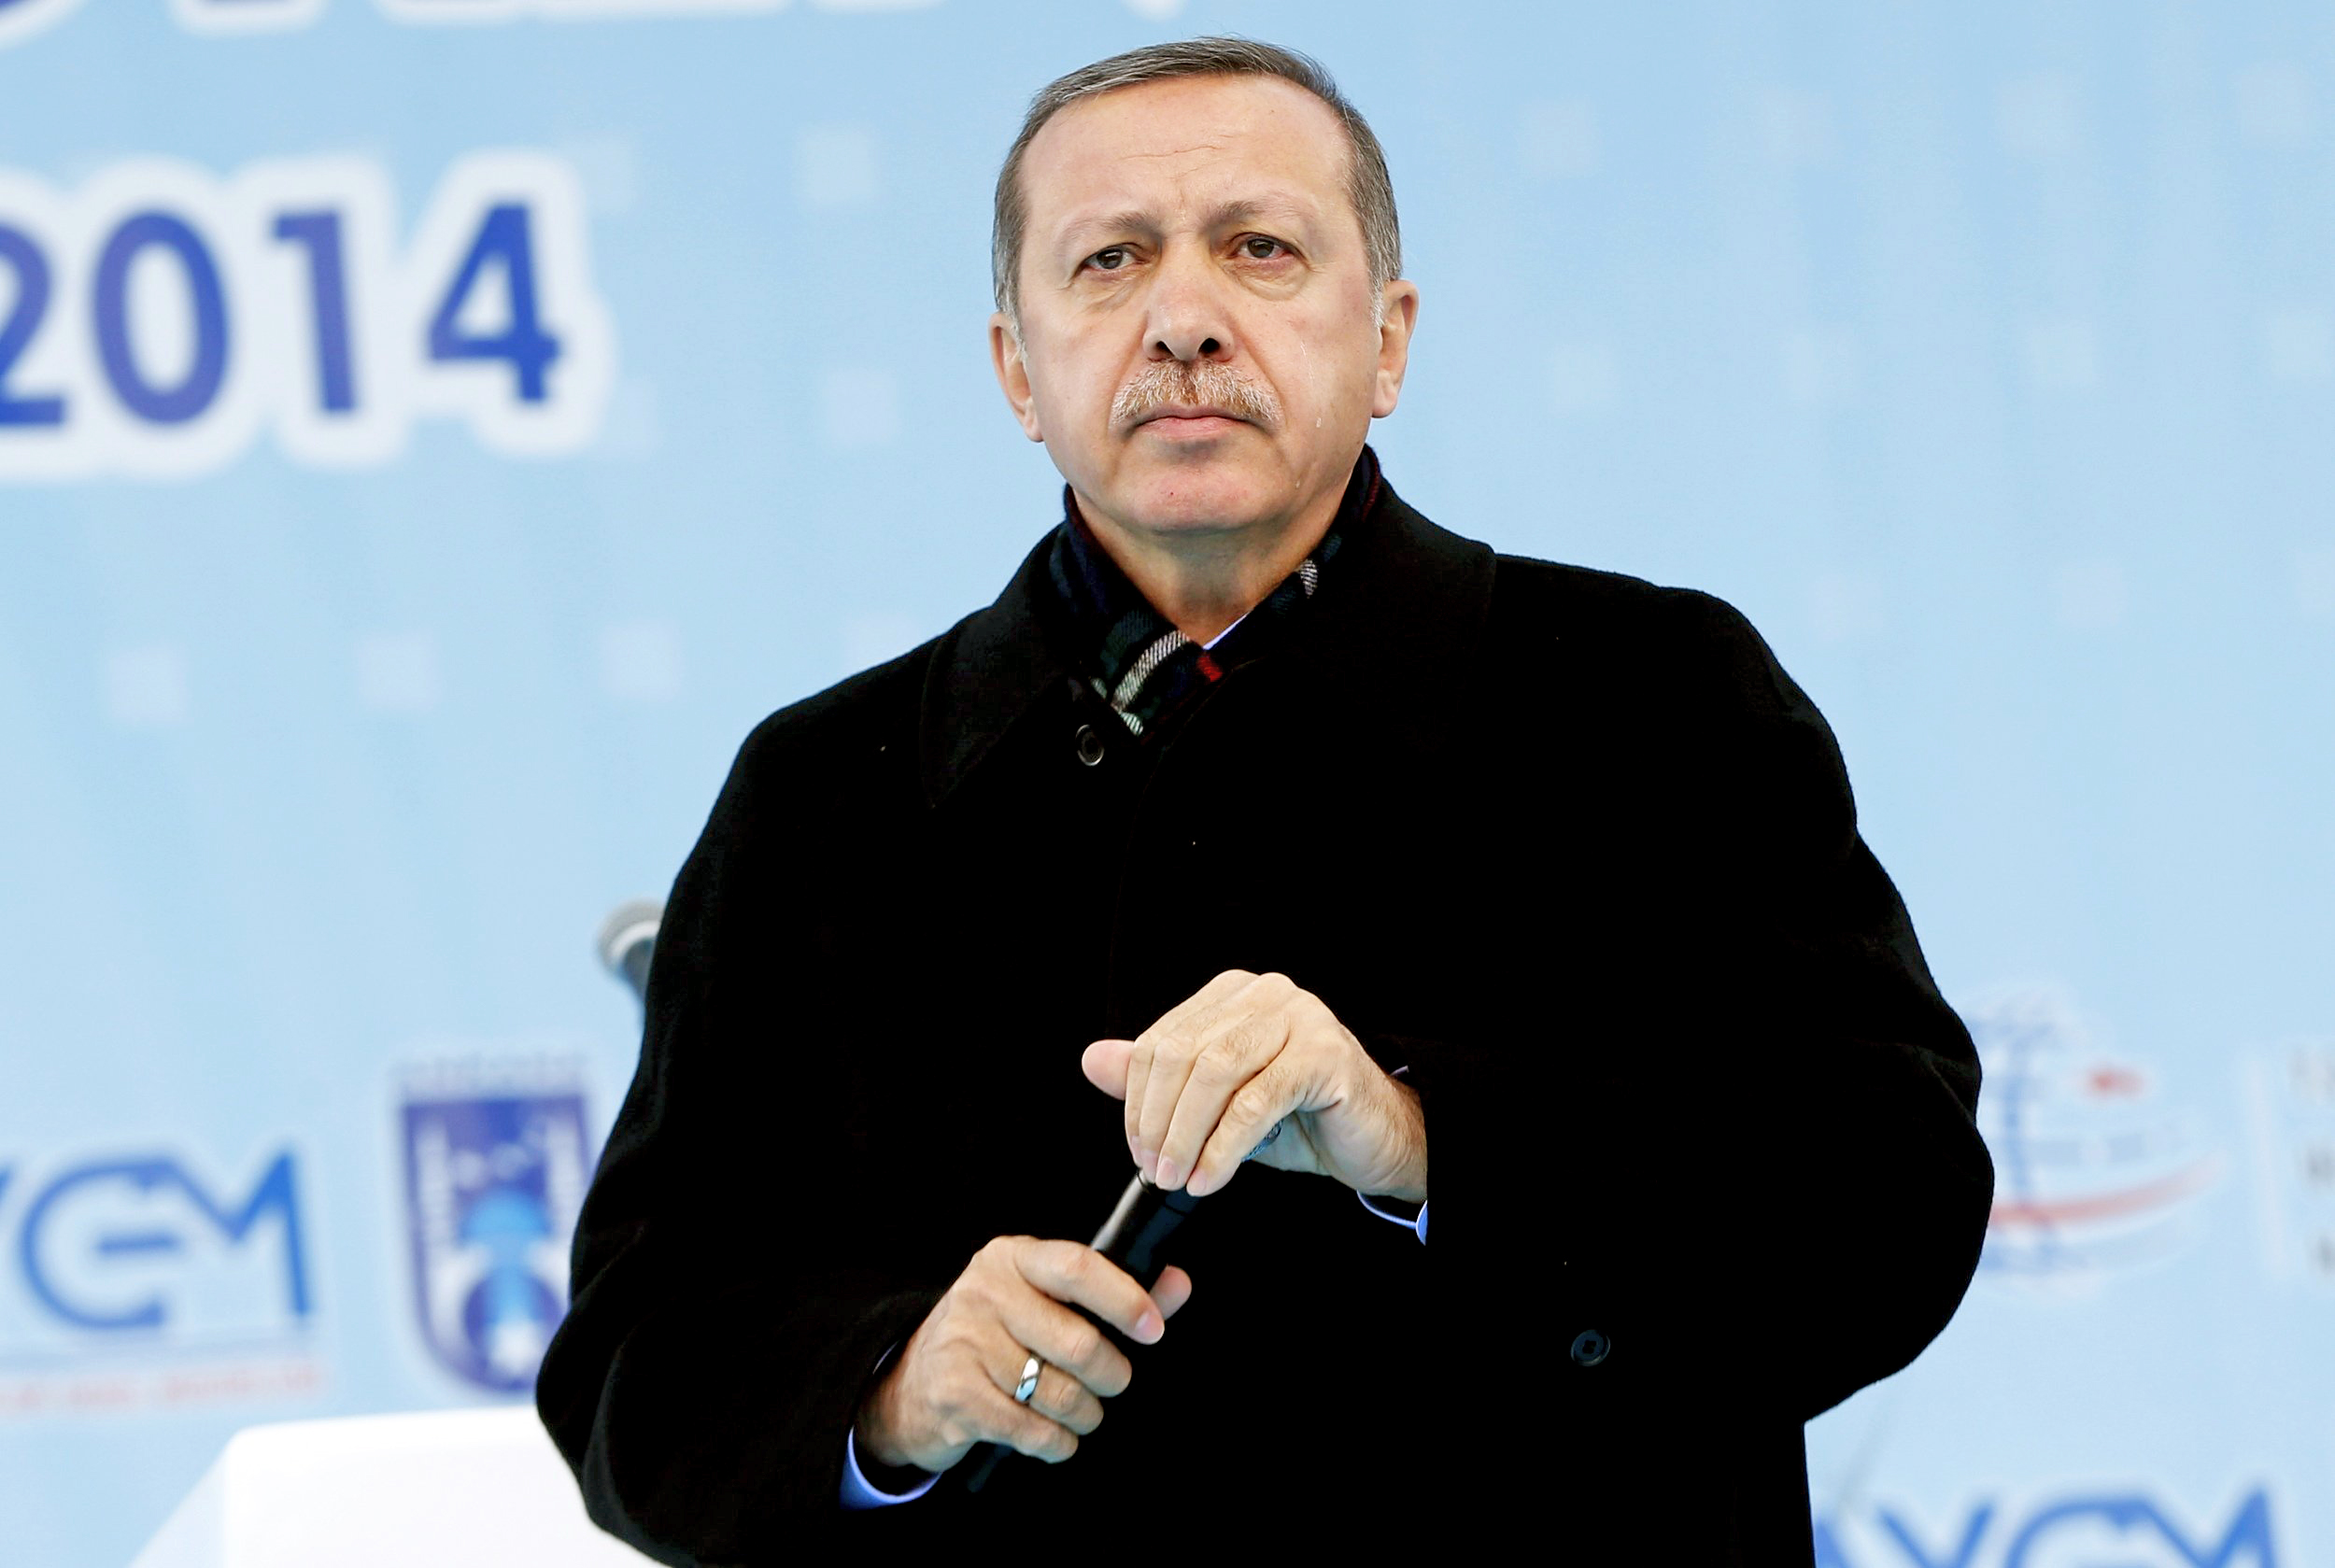 Turkey's Prime Minister Tayyip Erdogan addresses the crowd during an opening ceremony of a new metro line in Ankara on March 13, 2014. (Umit Bektas—Reuters)